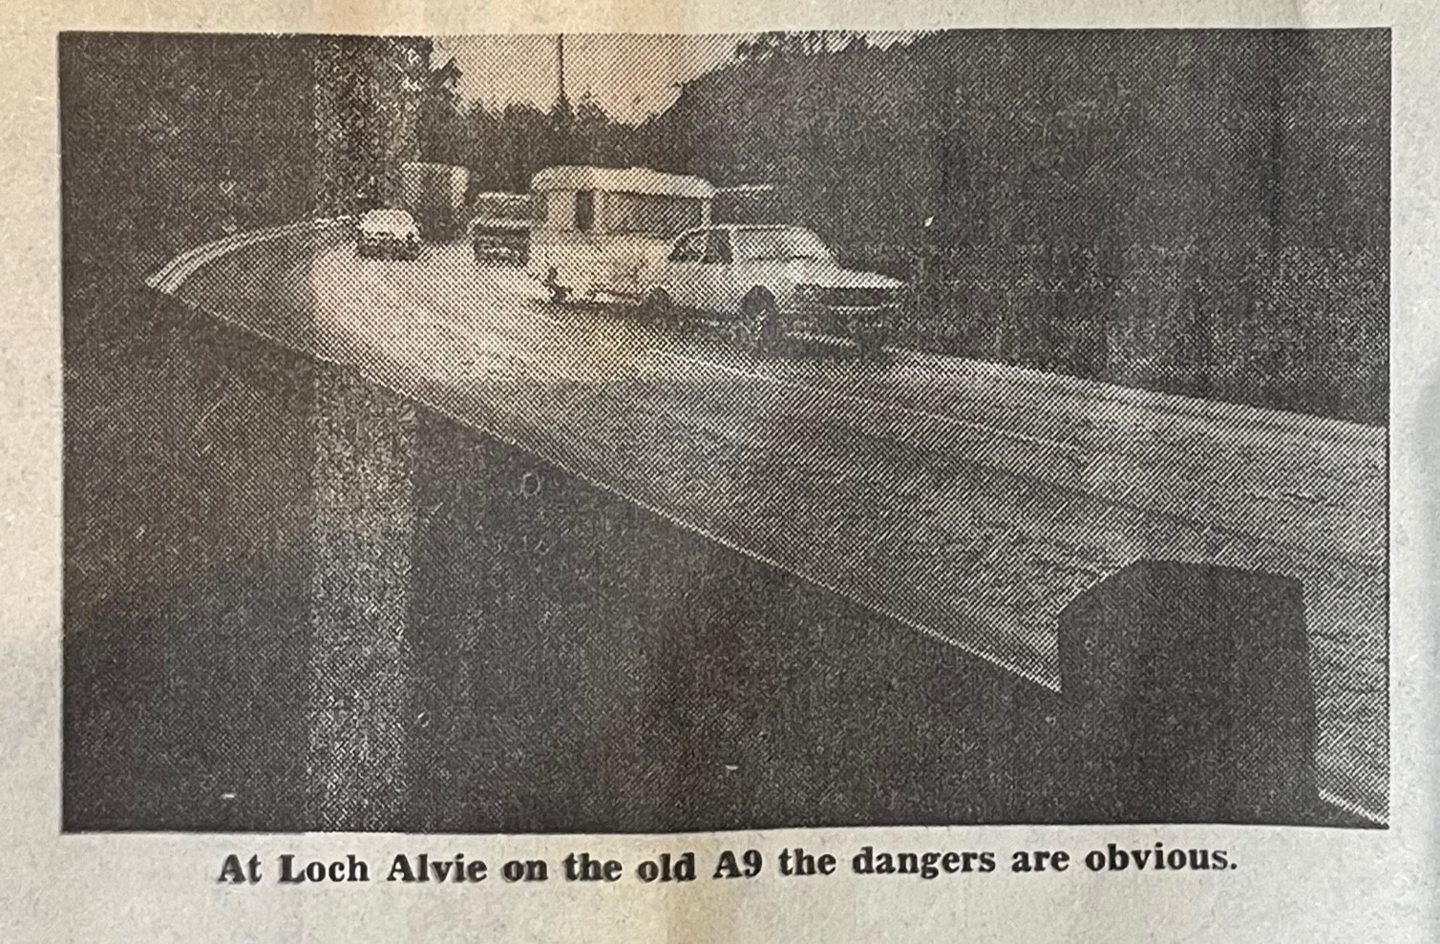 Traffic on the old A9 at Loch Alvie. The caption reads 'At Loch Alvie on the old A9 the dangers are obvious.